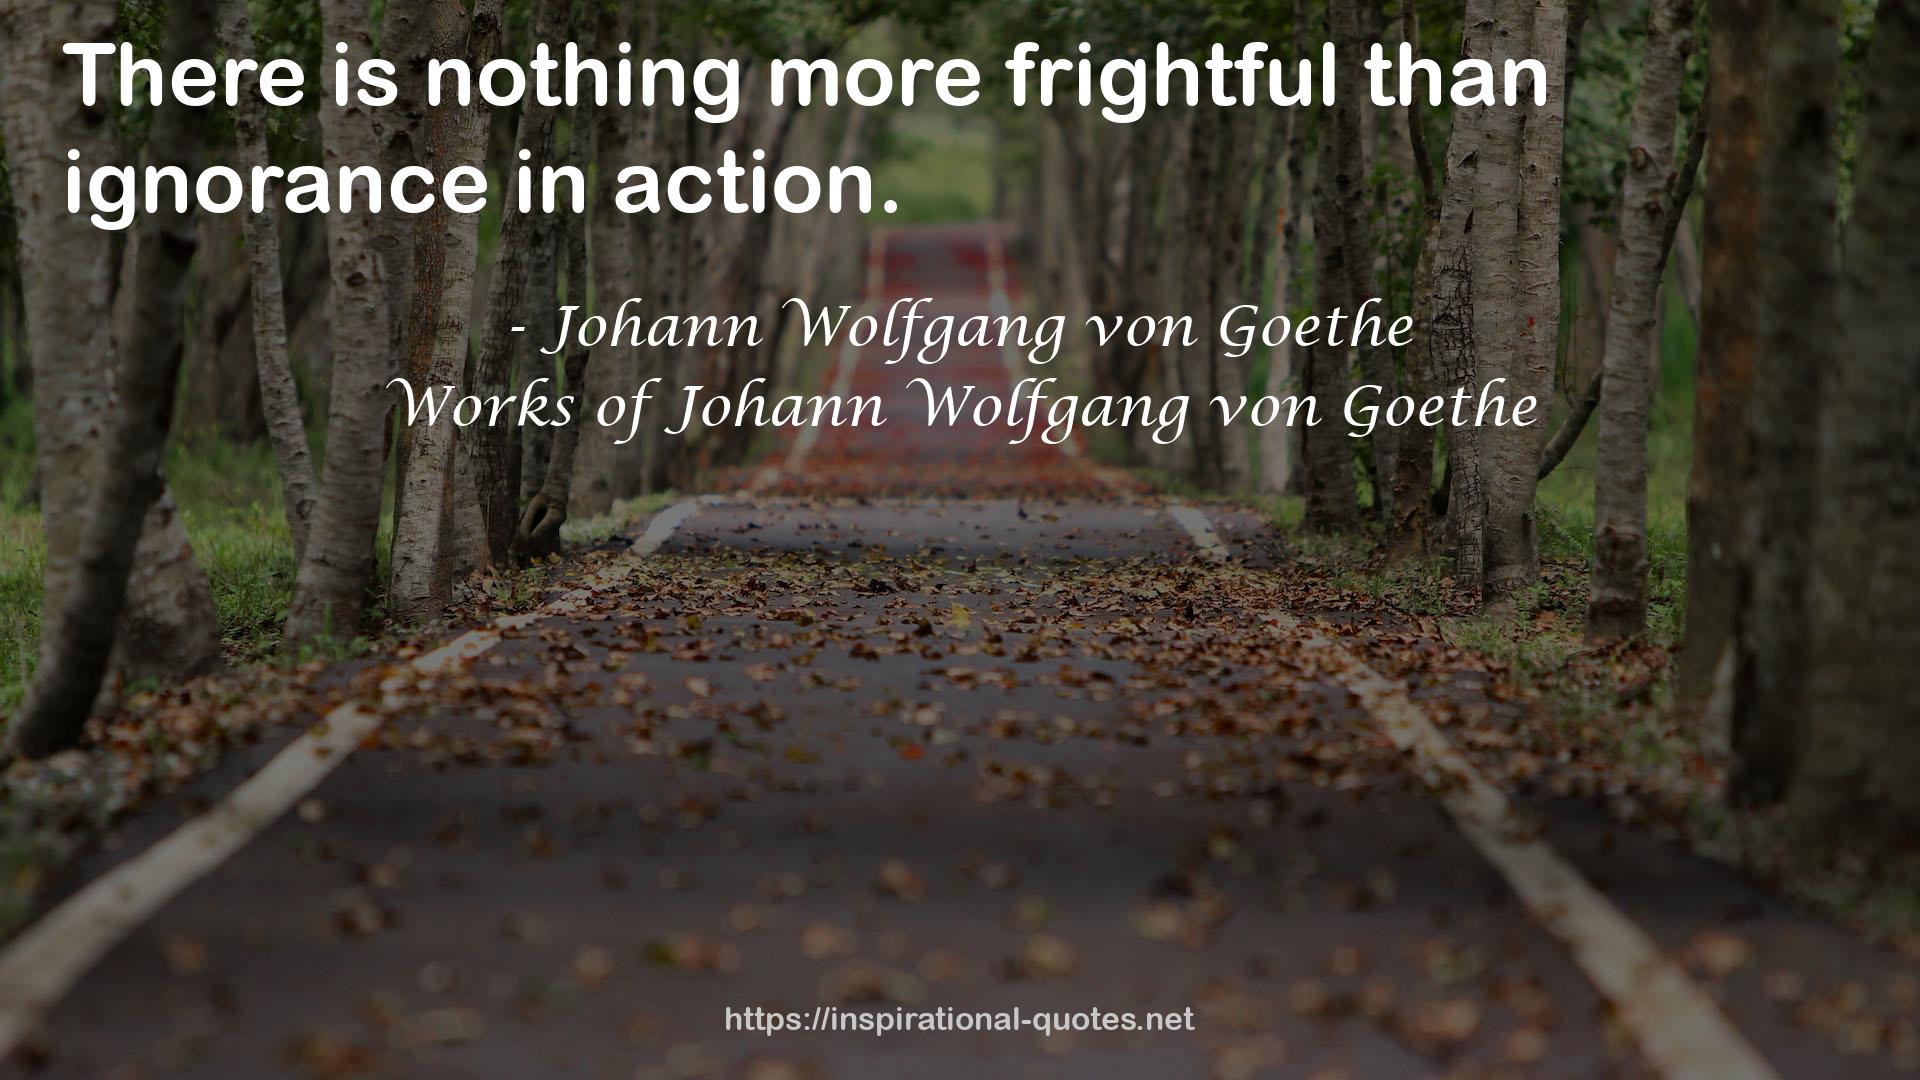 Works of Johann Wolfgang von Goethe QUOTES